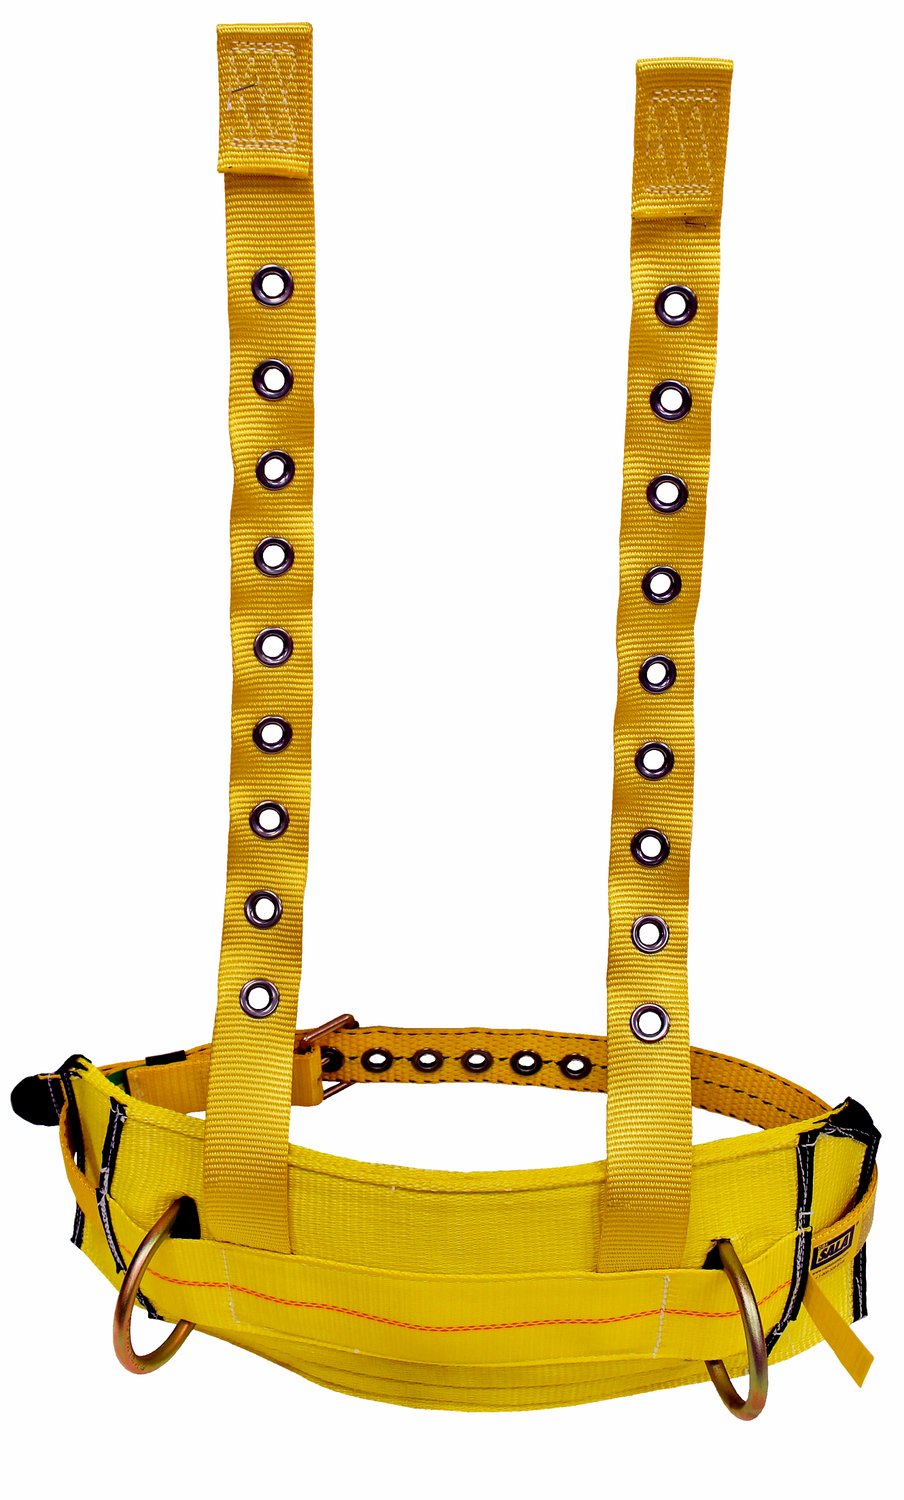 7012815130 - 3M DBI-SALA Derrick Tongue Buckle Positioning Belt with Tongue Buckle Harness Connector 1003220, Yellow, Medium